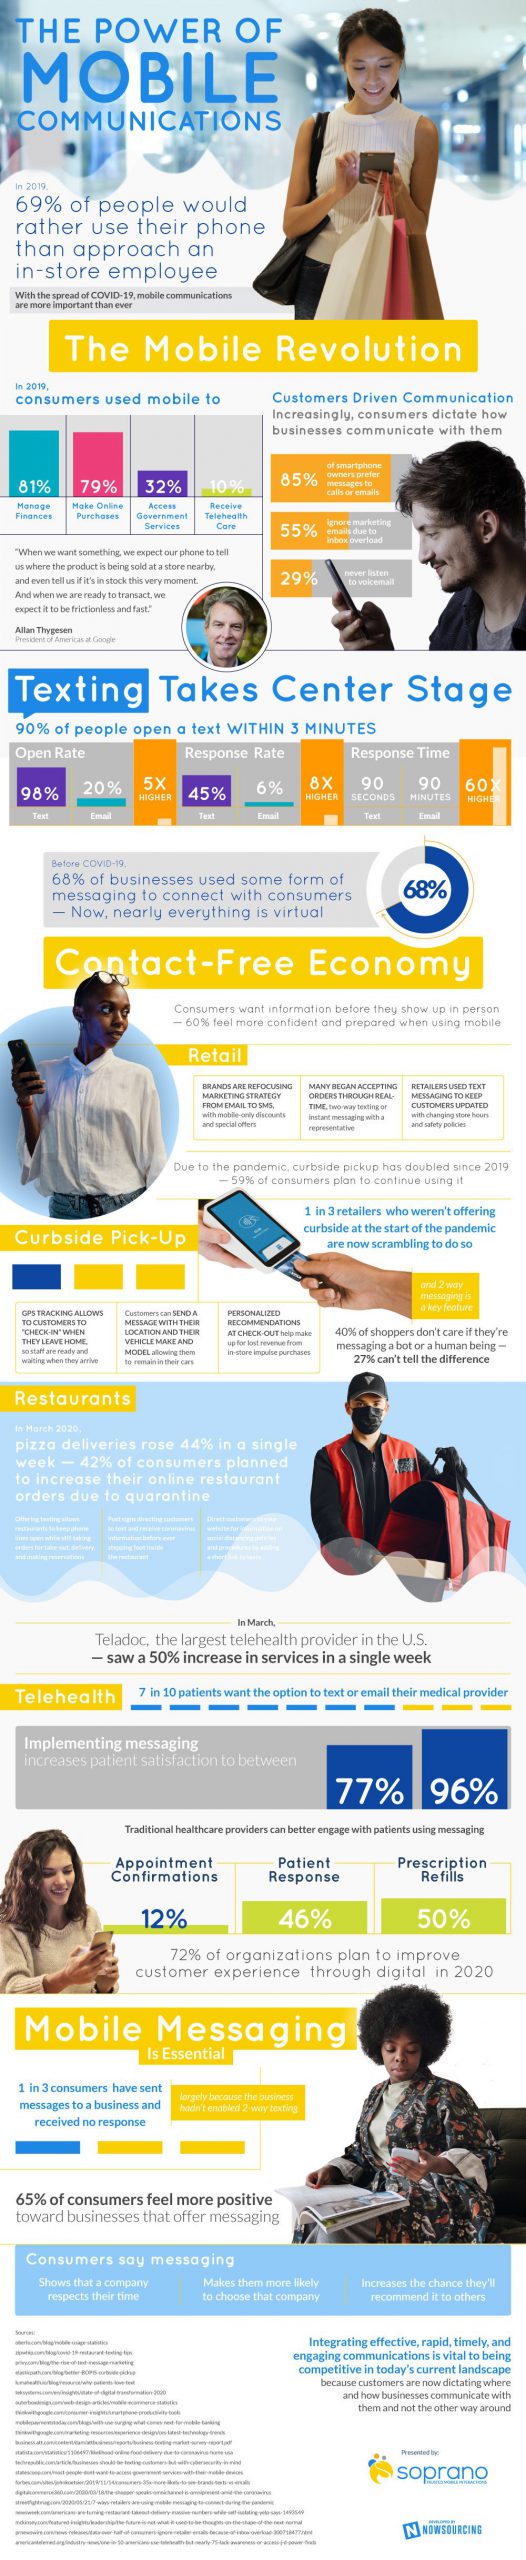 the power of mobile communication infographic scaled 1